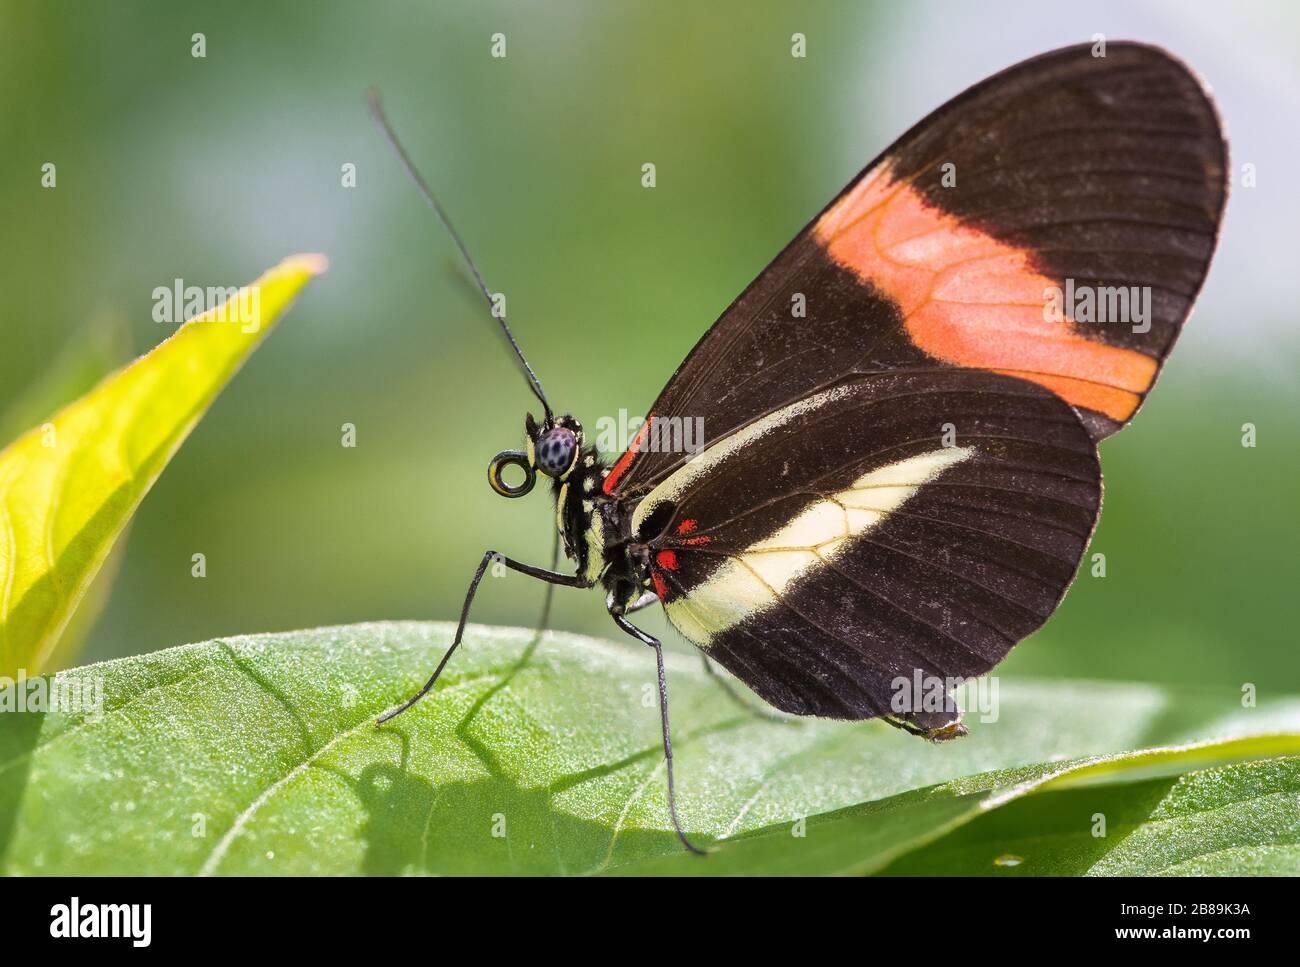 A Red Postman Butterfly Perched on a Leaf Stock Photo